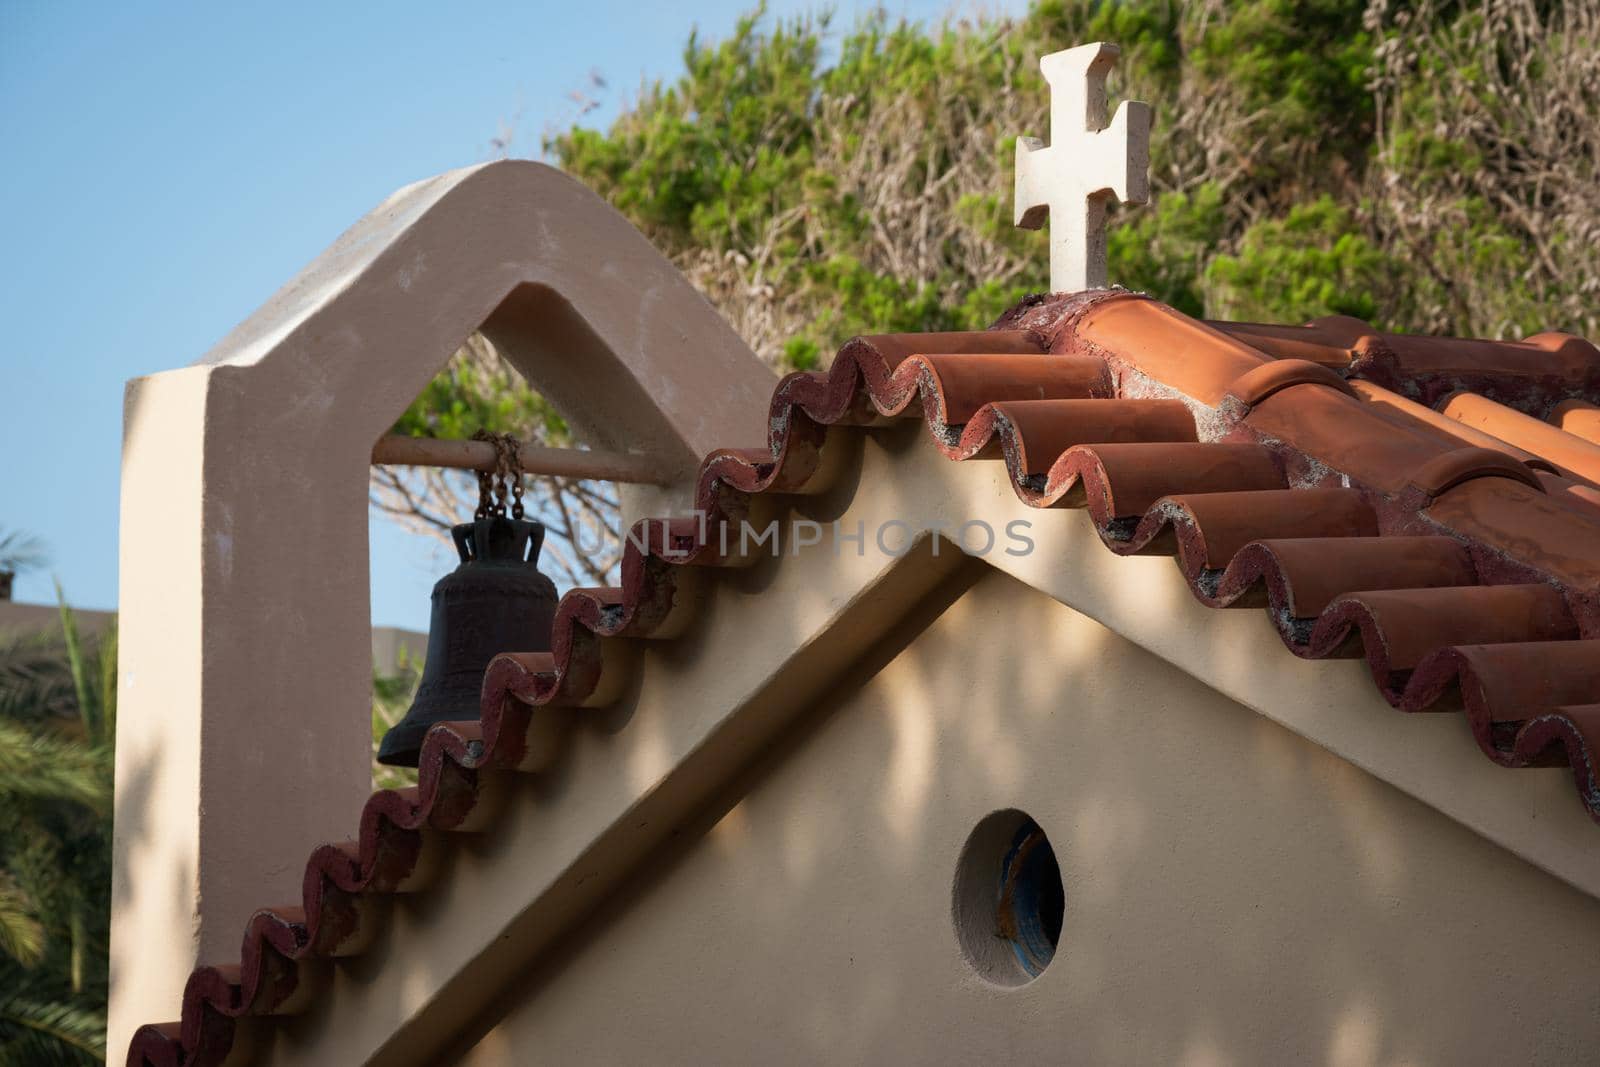 Roof of a beautiful house with a cross and a bell on it in Malia, Crete, Greece by wektorygrafika